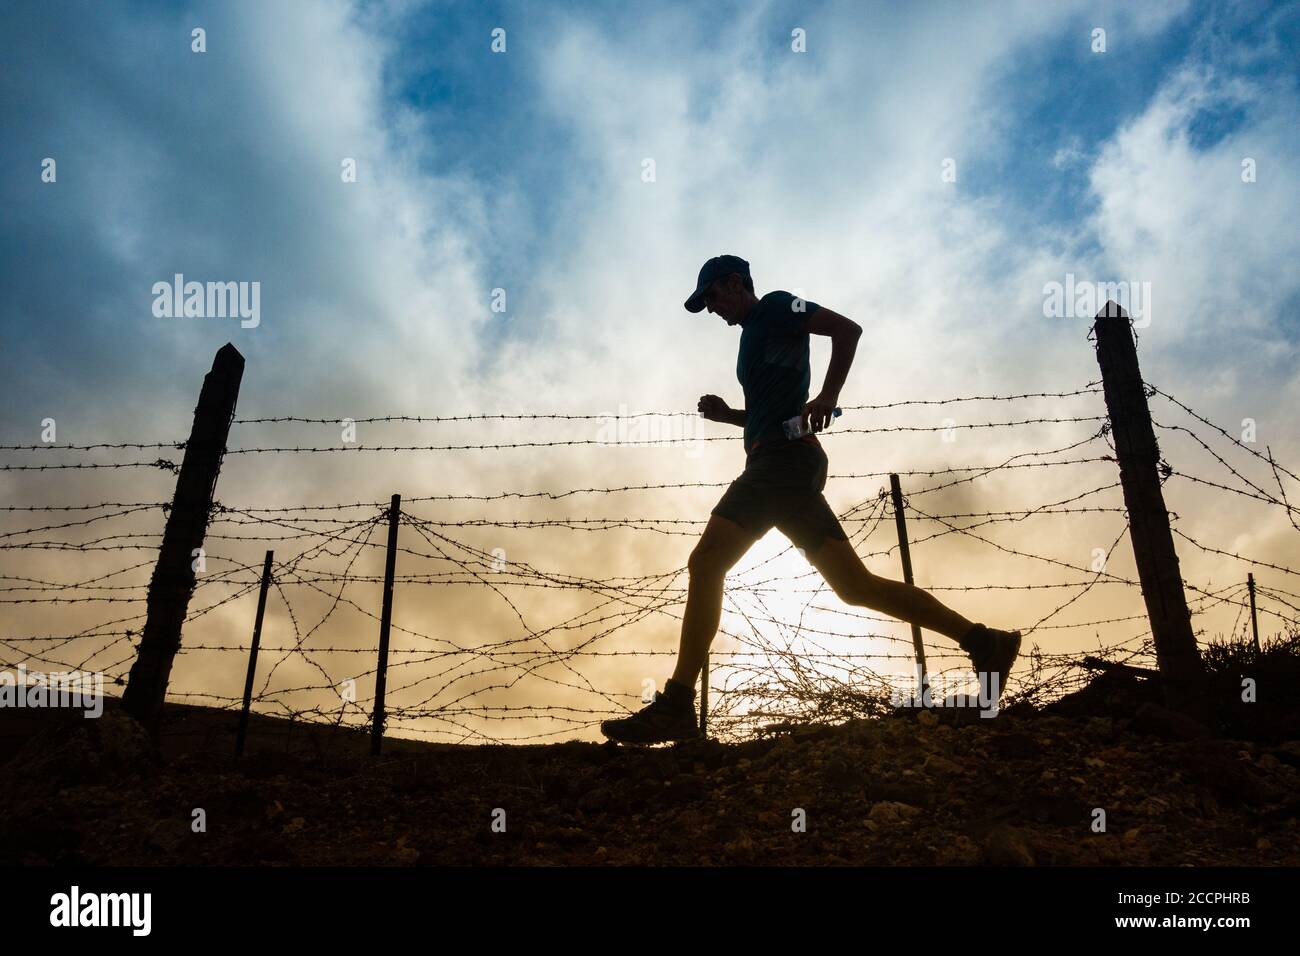 Las Palmas, Gran Canaria, Canary Islands, Spain. 24th August, 2020. A trail runner runs past military base fence at sunrise on Gran Canaria as Covid 19 cases continue to rise in the Canary Islands and the rest of Spain. More new Coronavirus cases have been recorded in the month of August on Gran Canaria than during the months of March to August combined. More than 100 of the new cases have been traced to a Disco in the capital Las Palmas. Credit: Alan Dawson/Alamy Live News Stock Photo